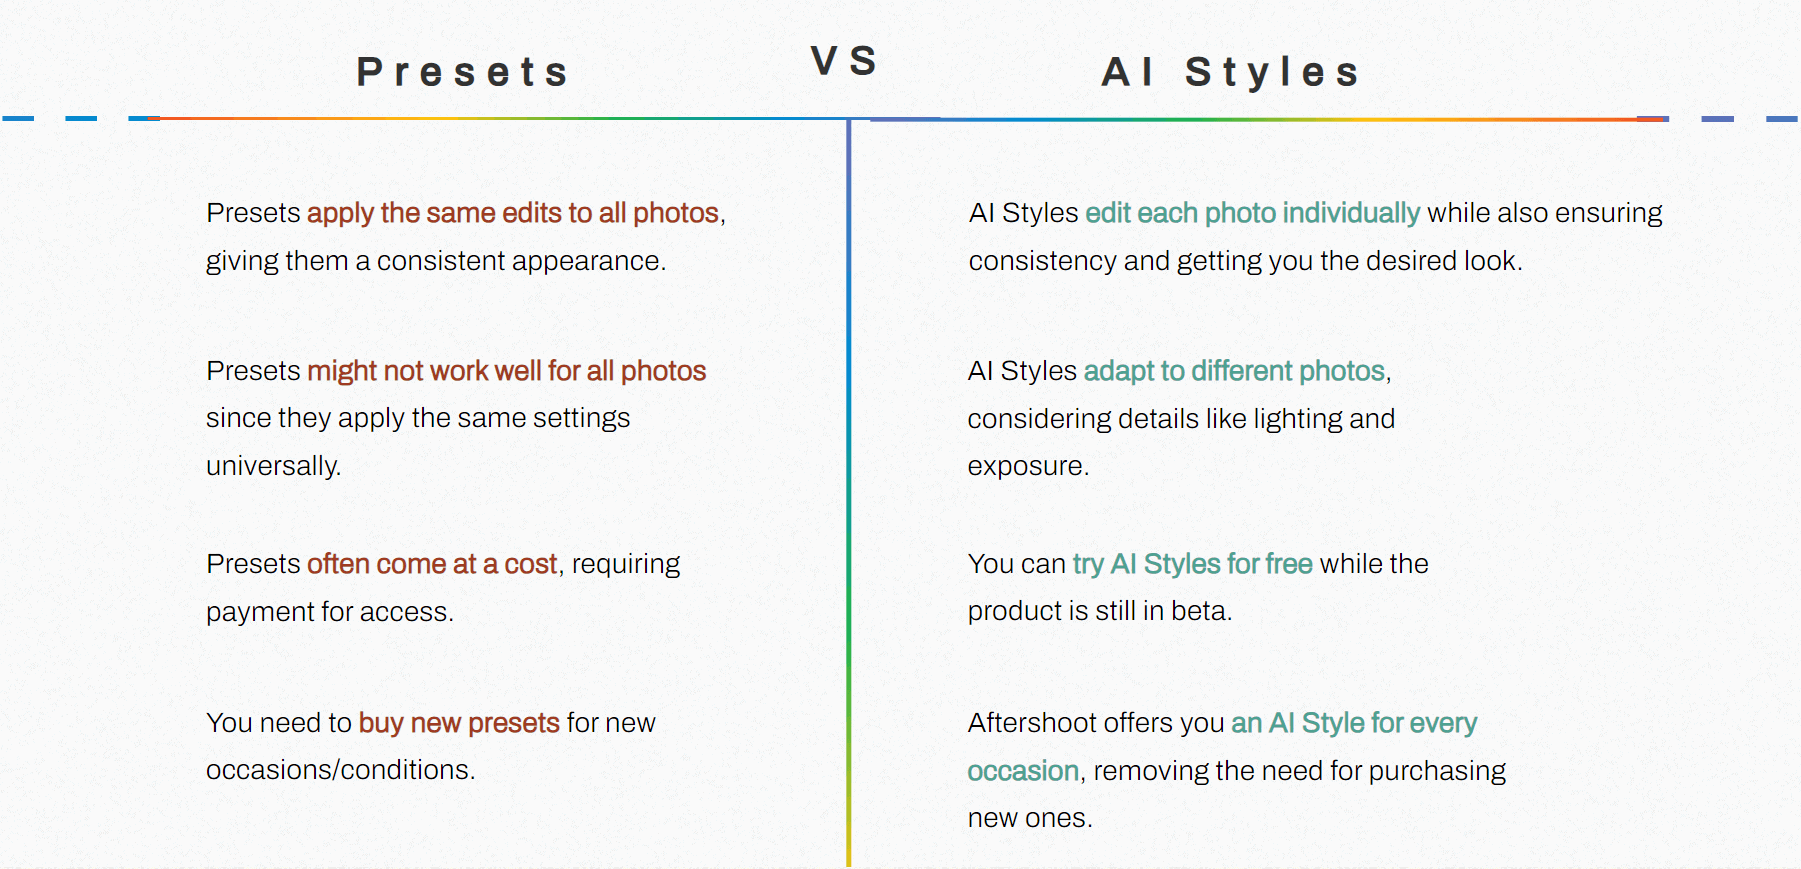 Why are AI Styles better than presets